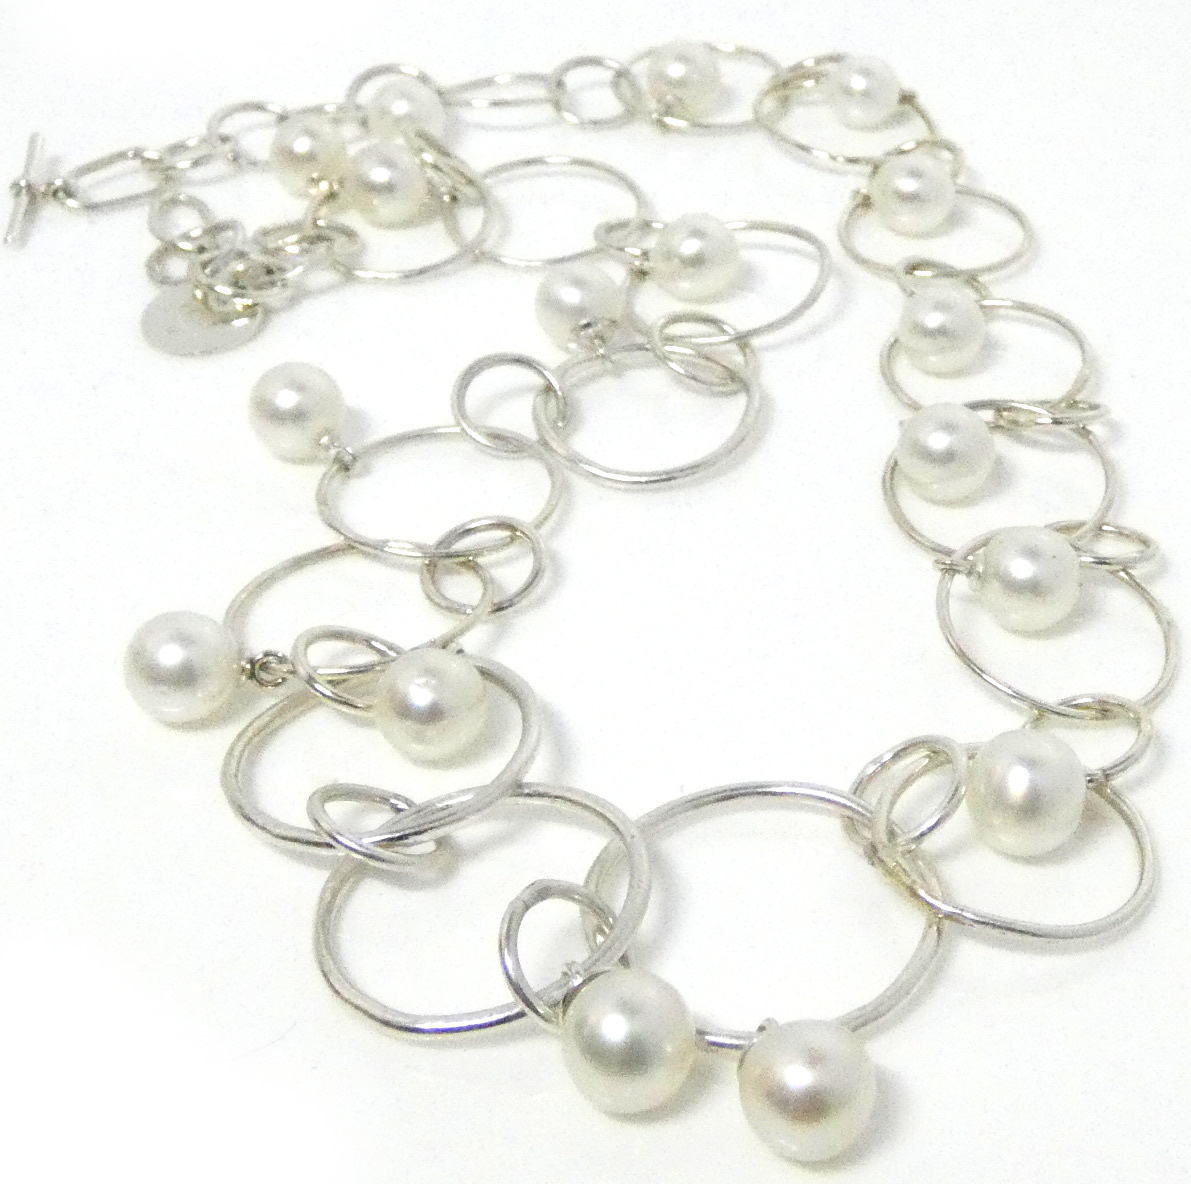 White Round Pearls and Silver Hoops Necklace